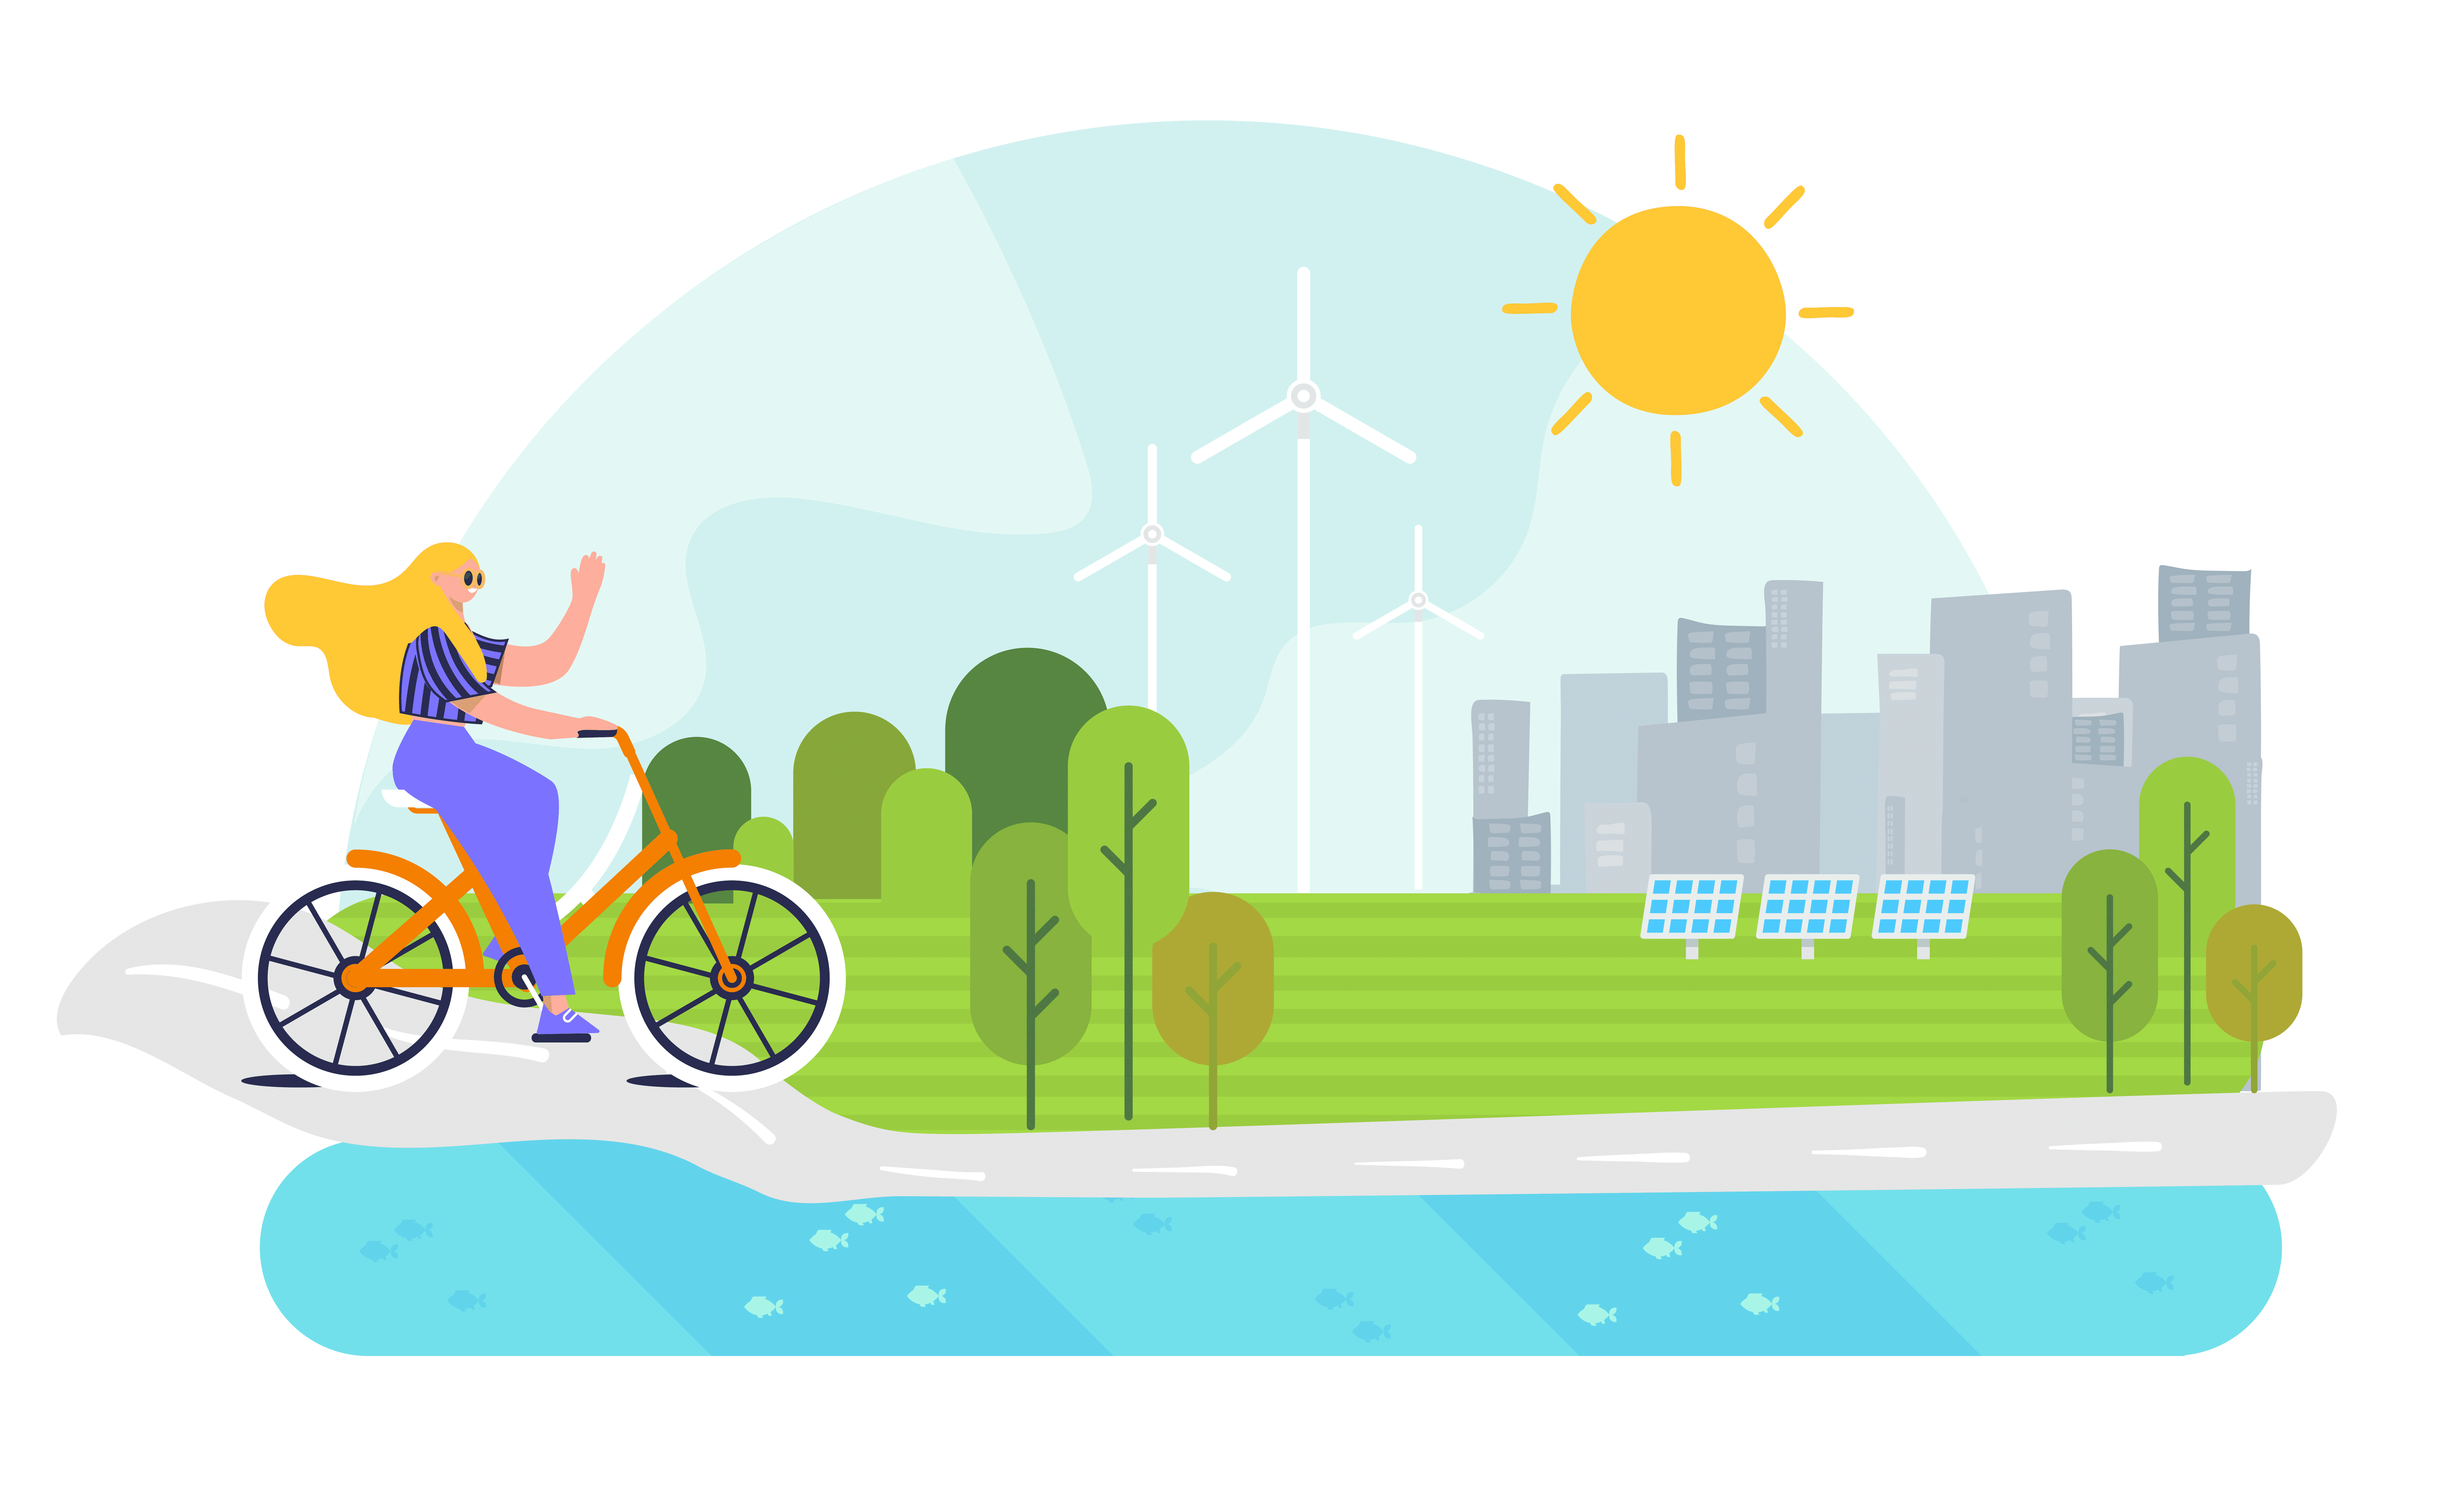 Image of a woman on a bicycle in a green, sustainable city.